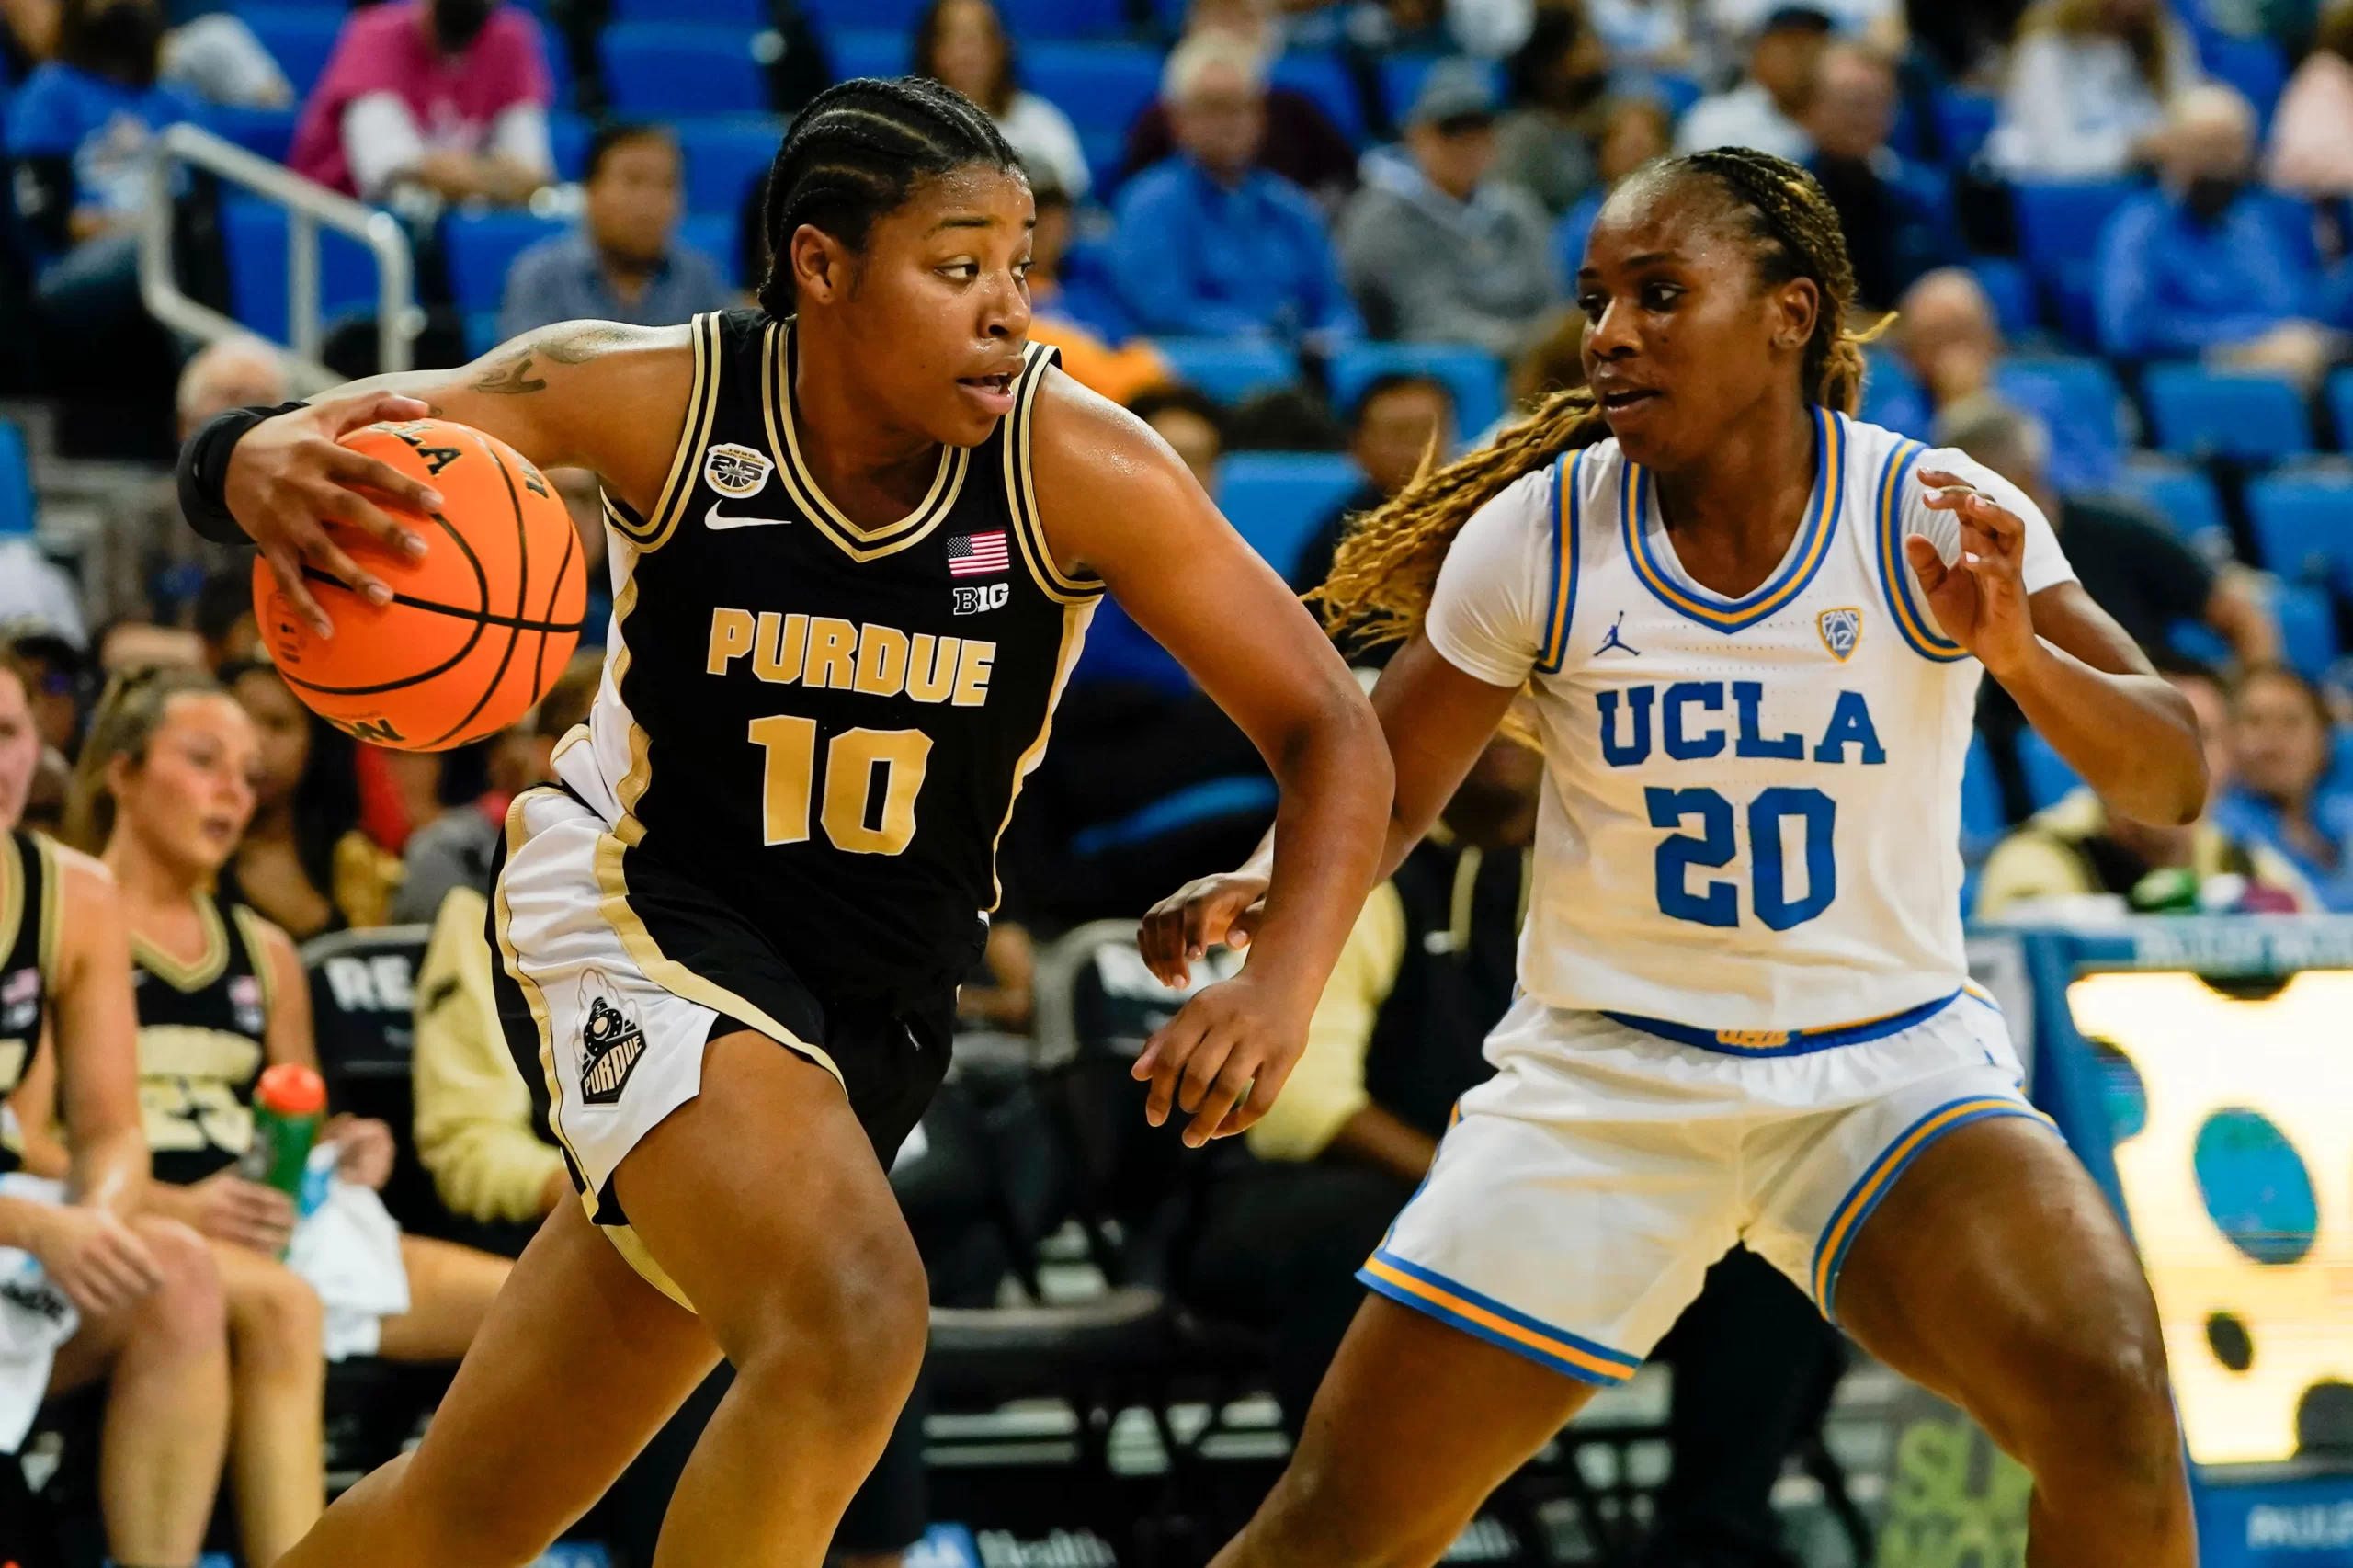 Power Rankings Shift: UCLA and UConn Drop Six Positions in Women's Basketball Rankings